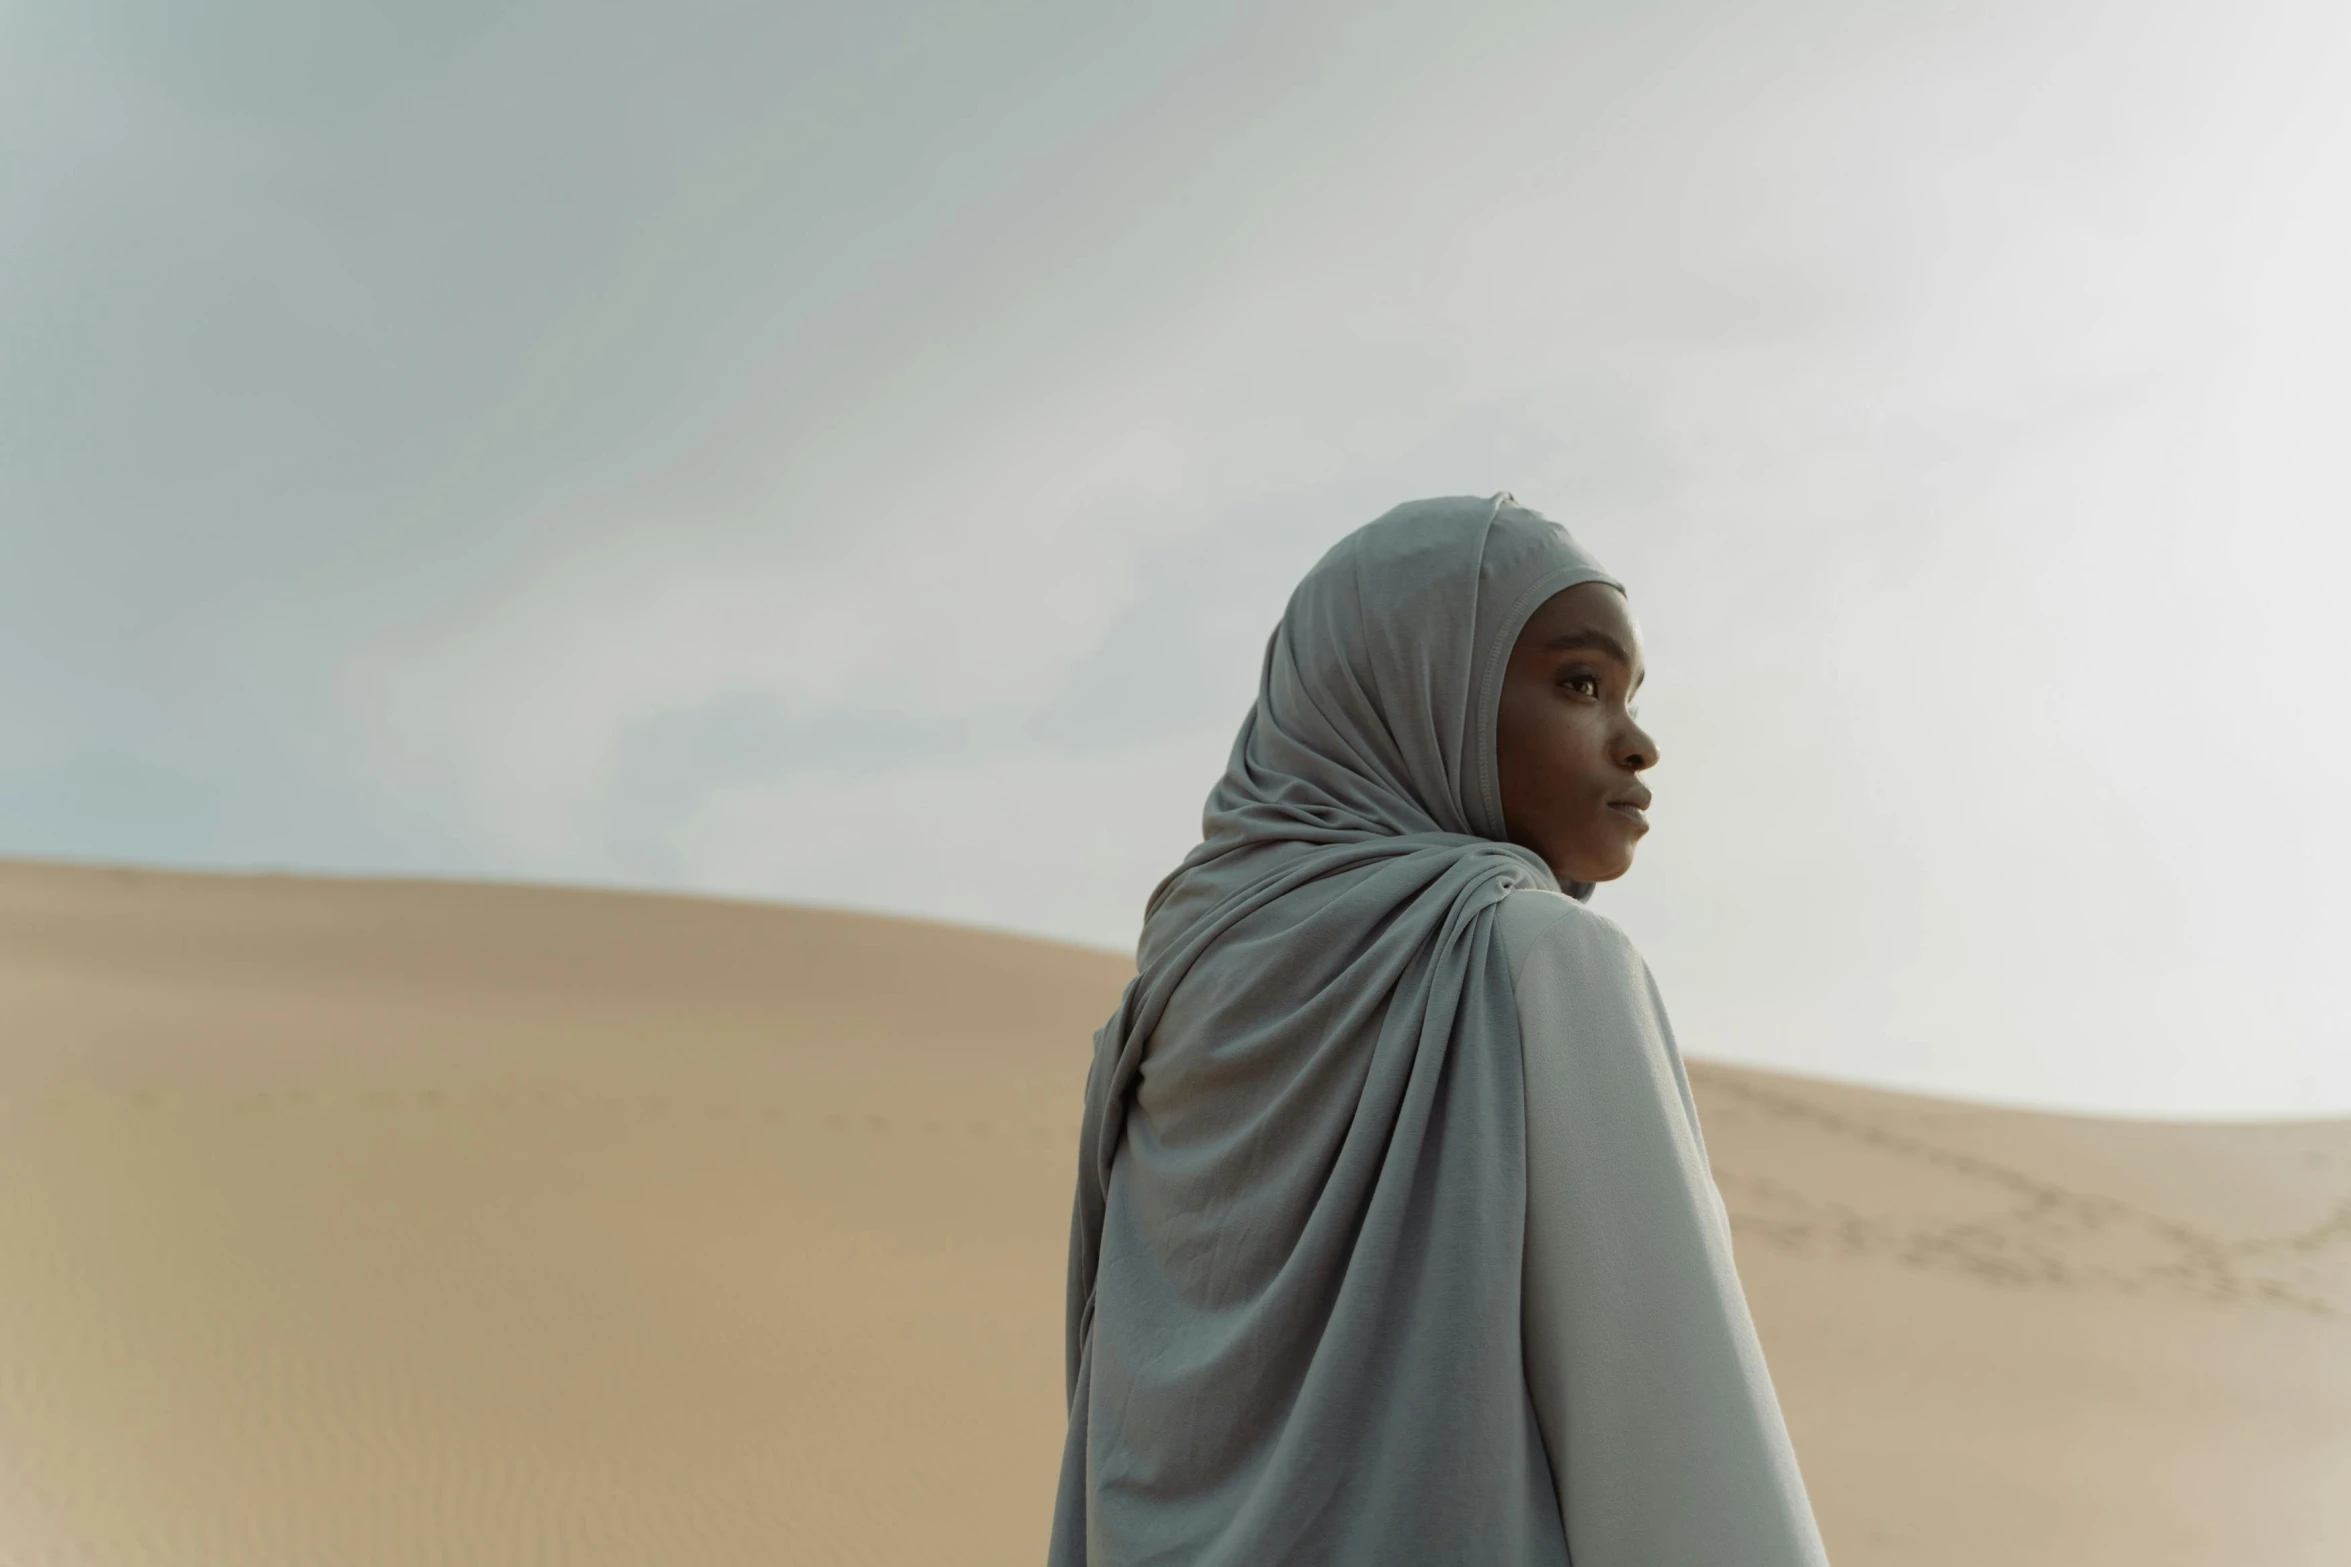 a woman standing in the middle of a desert, by Alasdair Grant Taylor, pexels contest winner, afrofuturism, wearing a grey robe, white hijab, still from l'estate, african american young woman